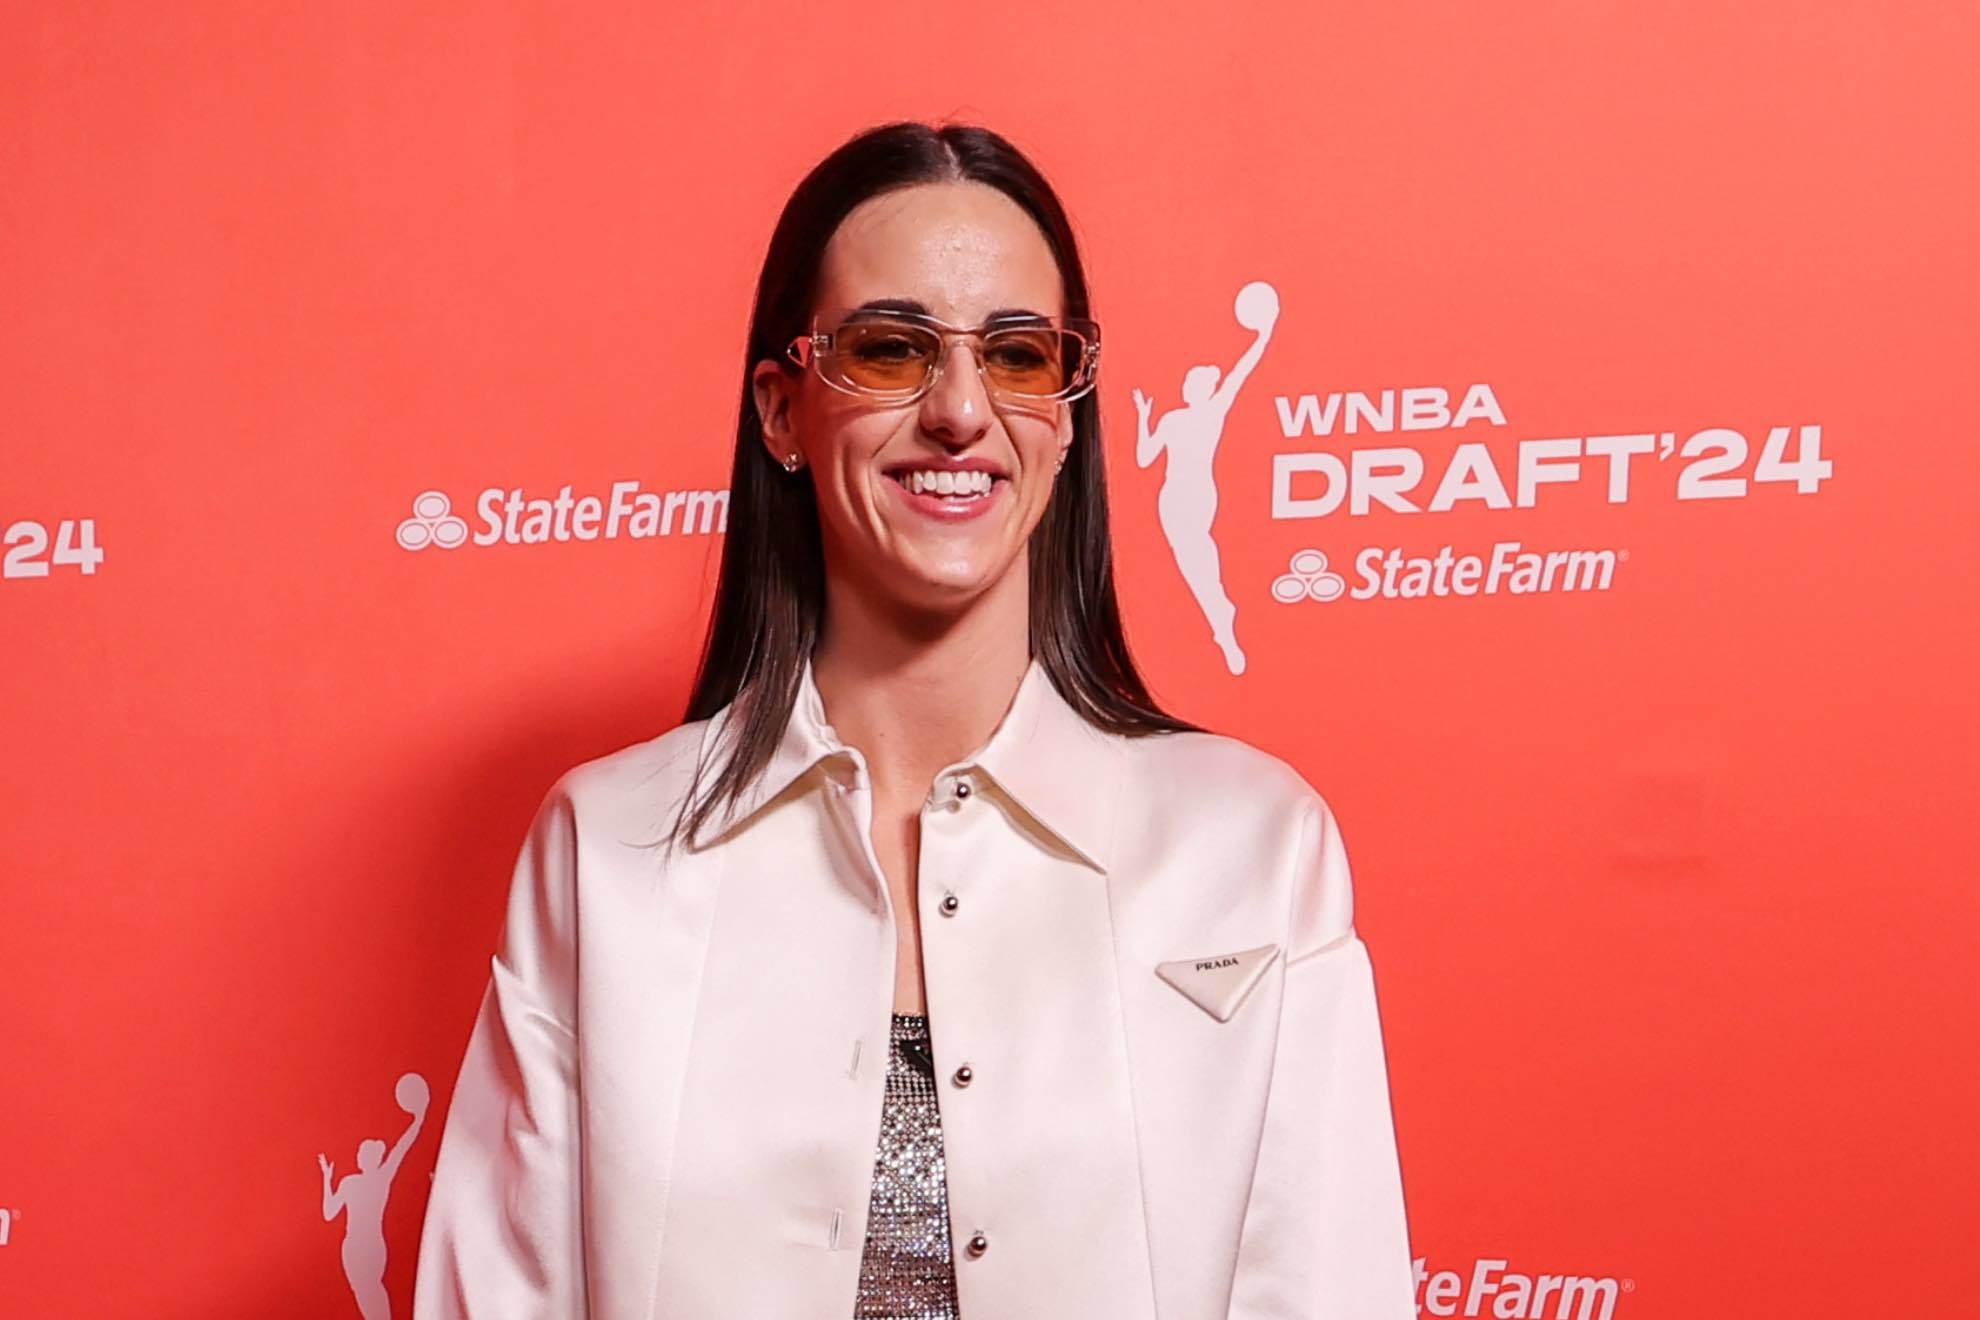 Caitlin Clark had plenty of eyes on her as the No. 1 pick of the WNBA Draft